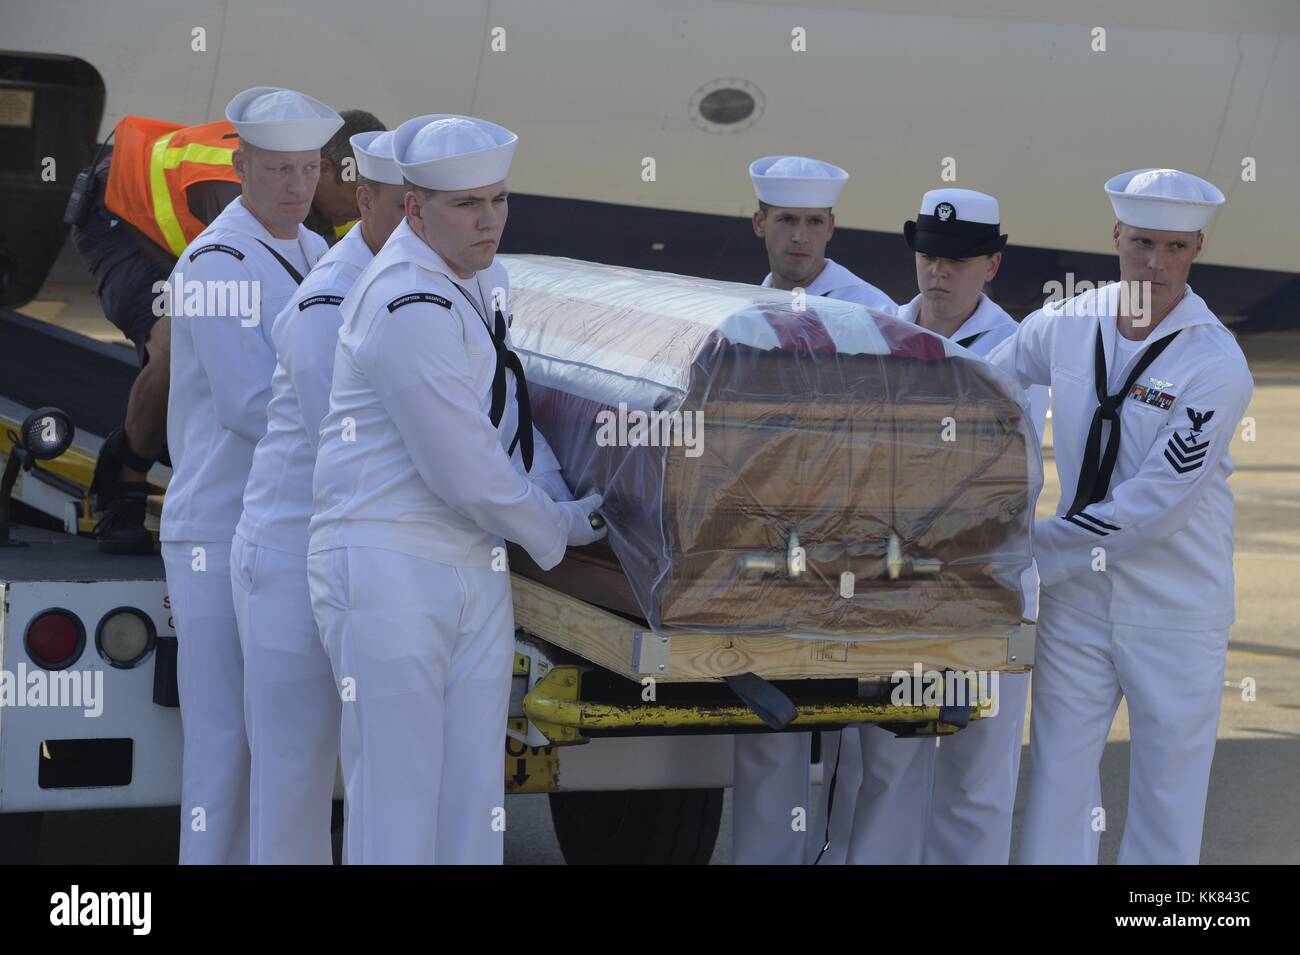 Sailors assigned to Navy Operational Support Center NOSC Nashville perform plane side honors for the remains of Logistics Specialist 2nd Class Randall Smith at Nashville International Airport, Nashville, Tennessee. Image courtesy Mass Communication Specialist 1st Class Dustin Q. Diaz/US Navy, United States, 2015. Stock Photo